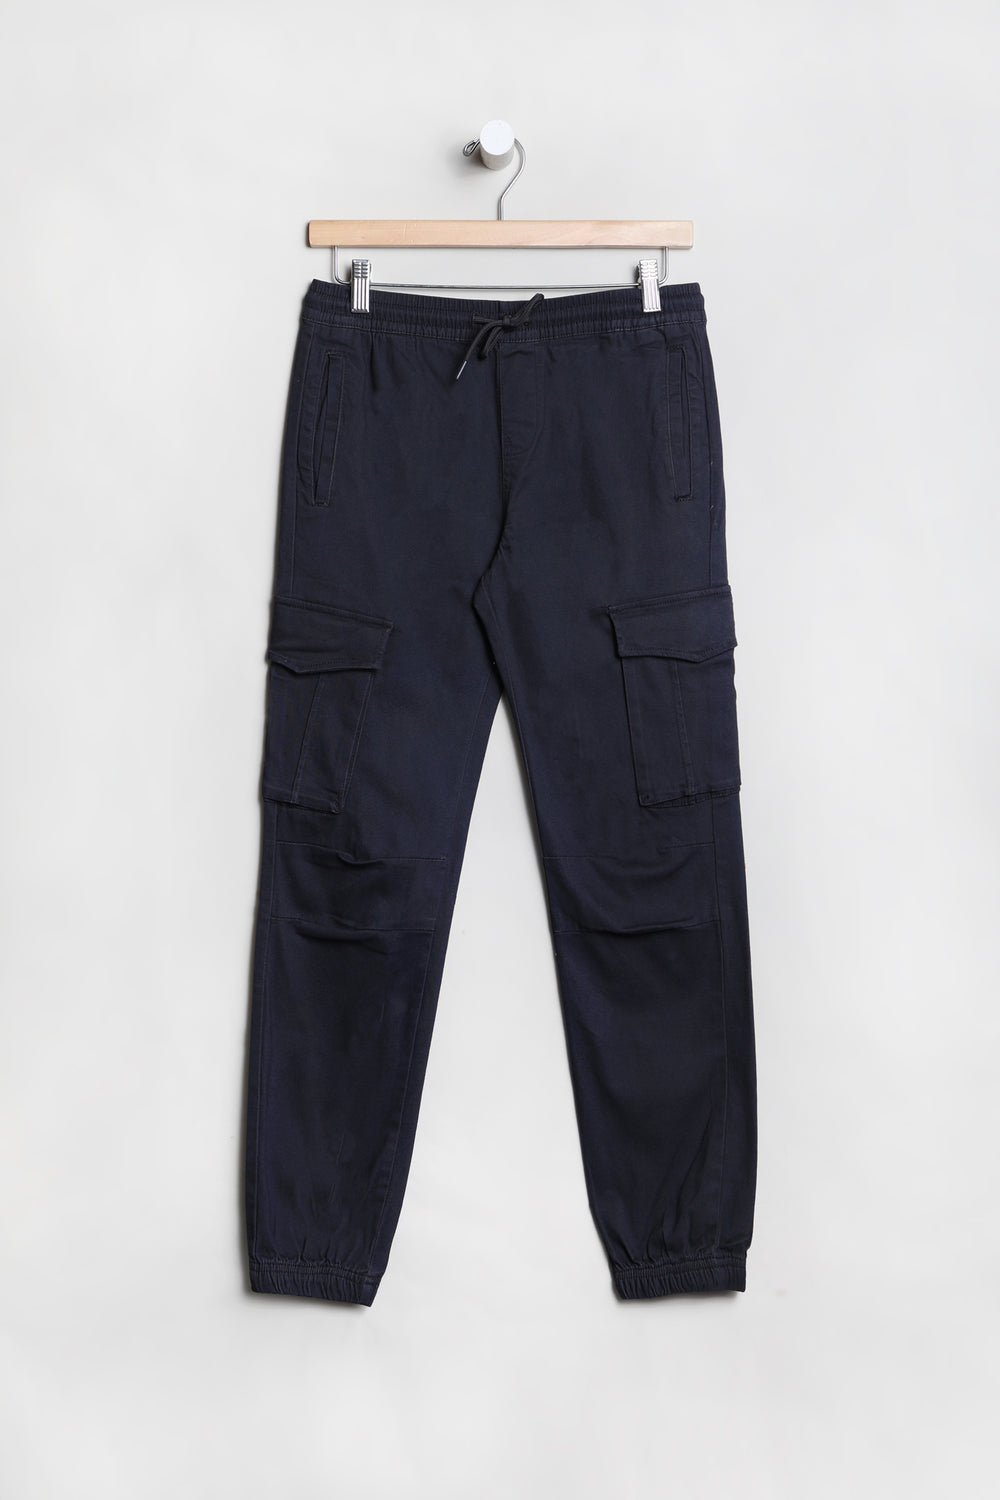 West49 Youth Twill Cargo Jogger West49 Youth Twill Cargo Jogger